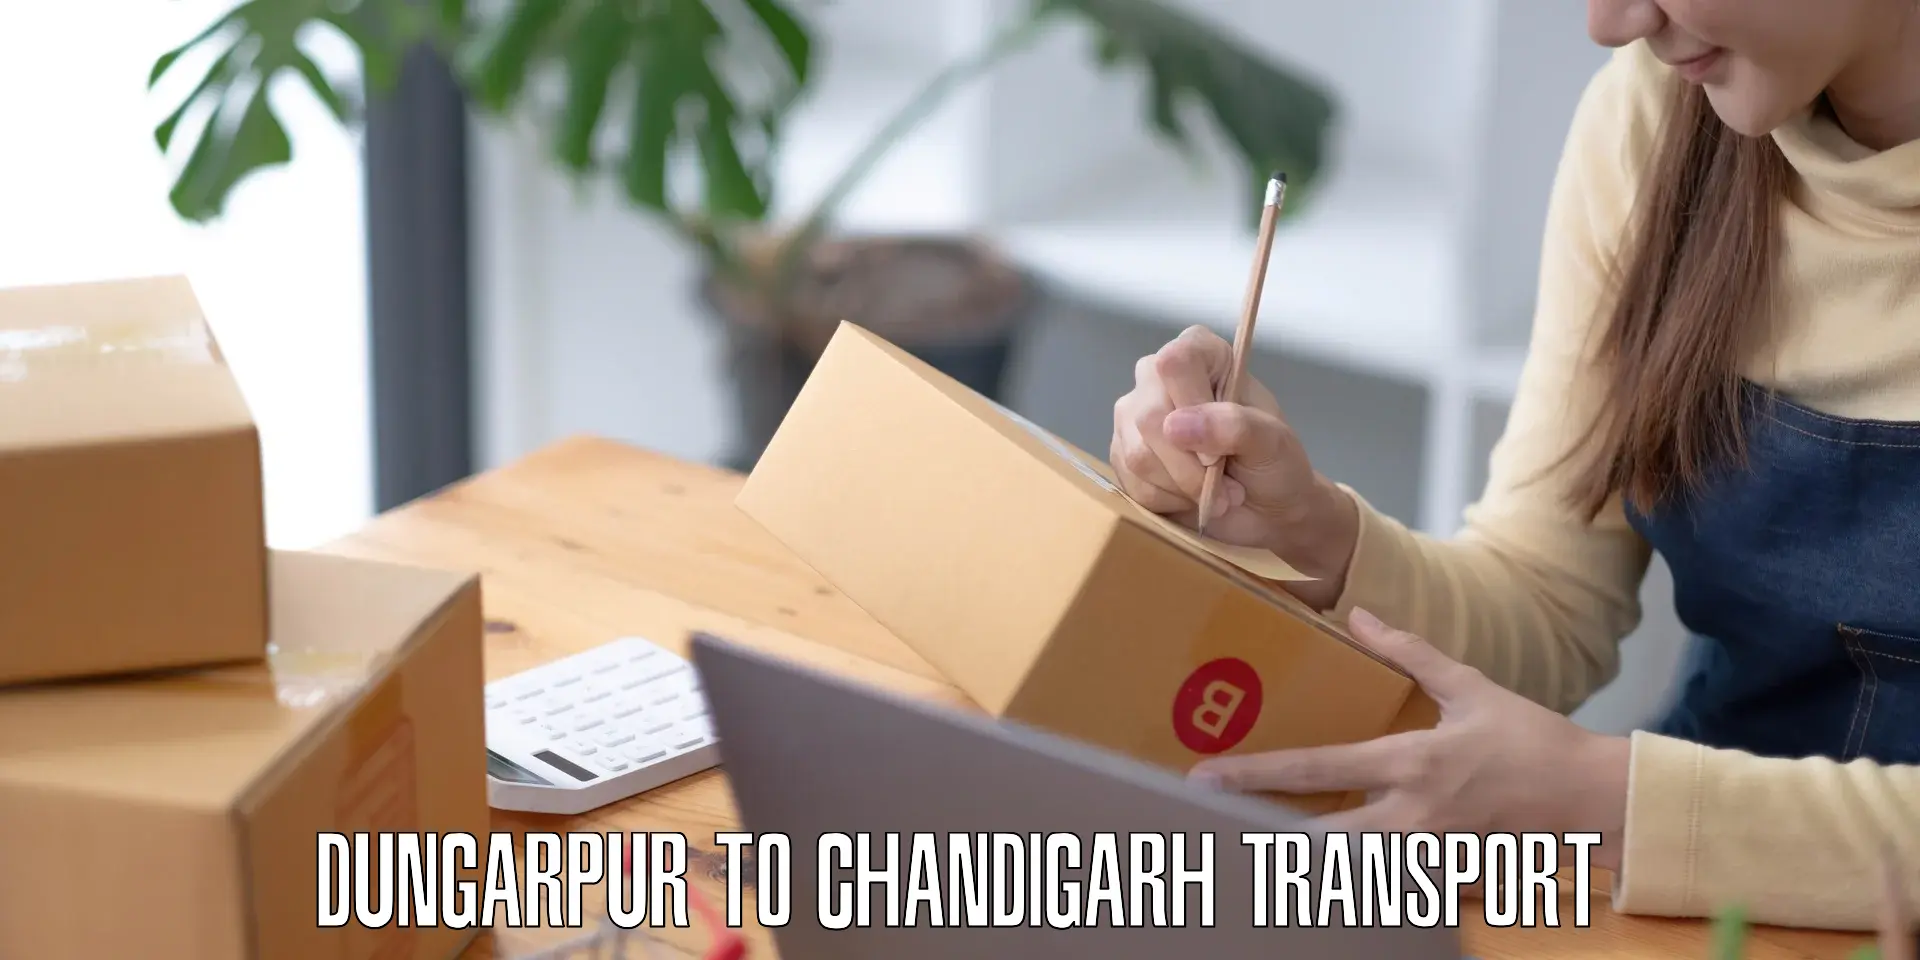 All India transport service Dungarpur to Chandigarh